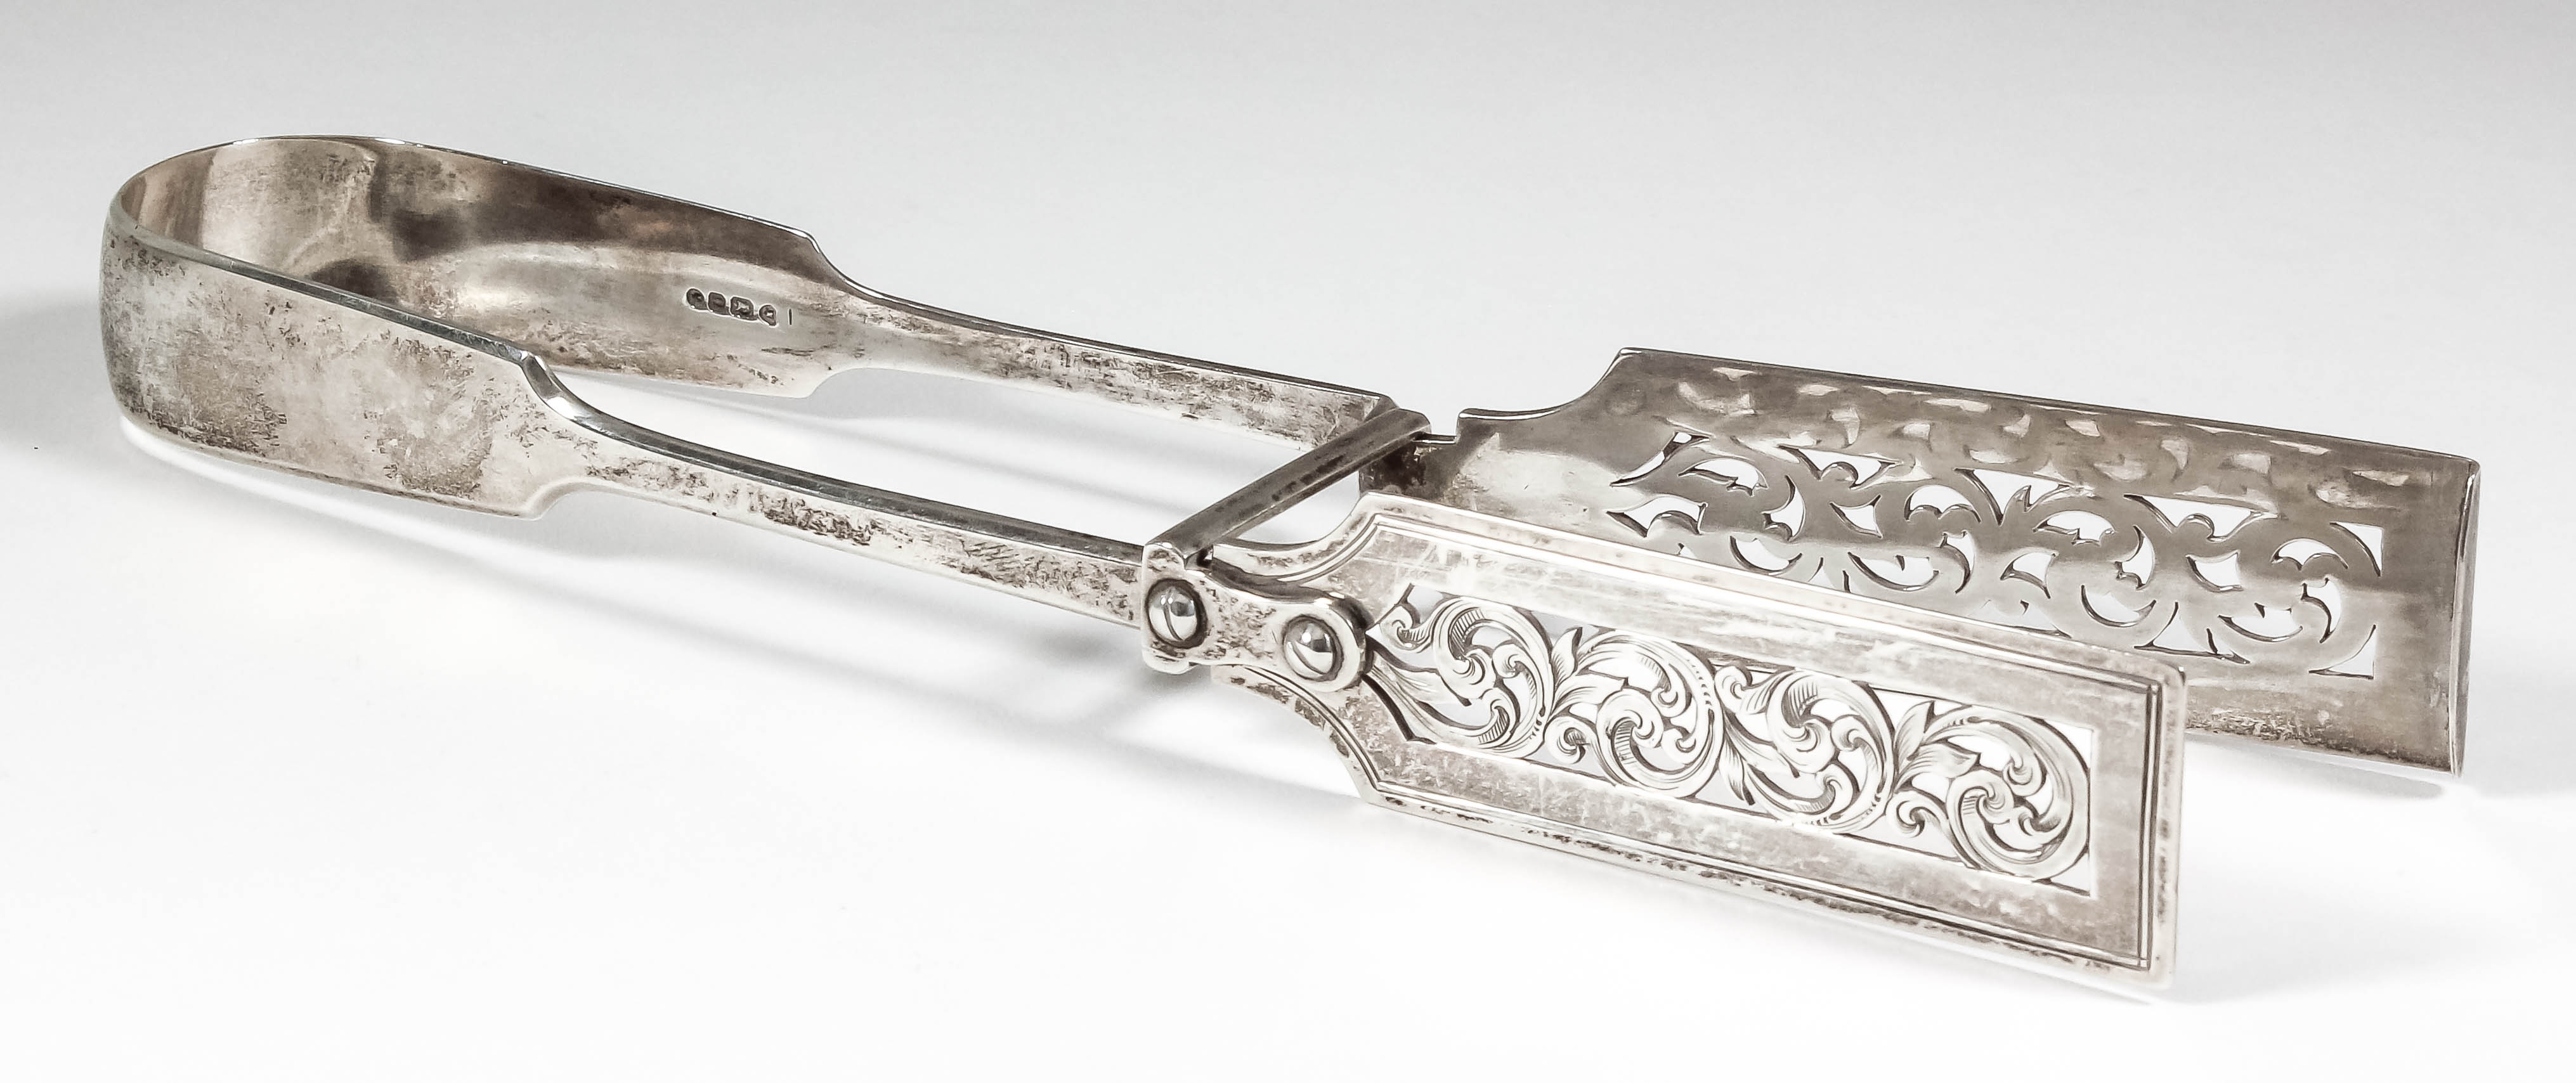 A pair of Victorian silver asparagus servers with pierced blades, by Elizabeth Eaton, London 1848 (